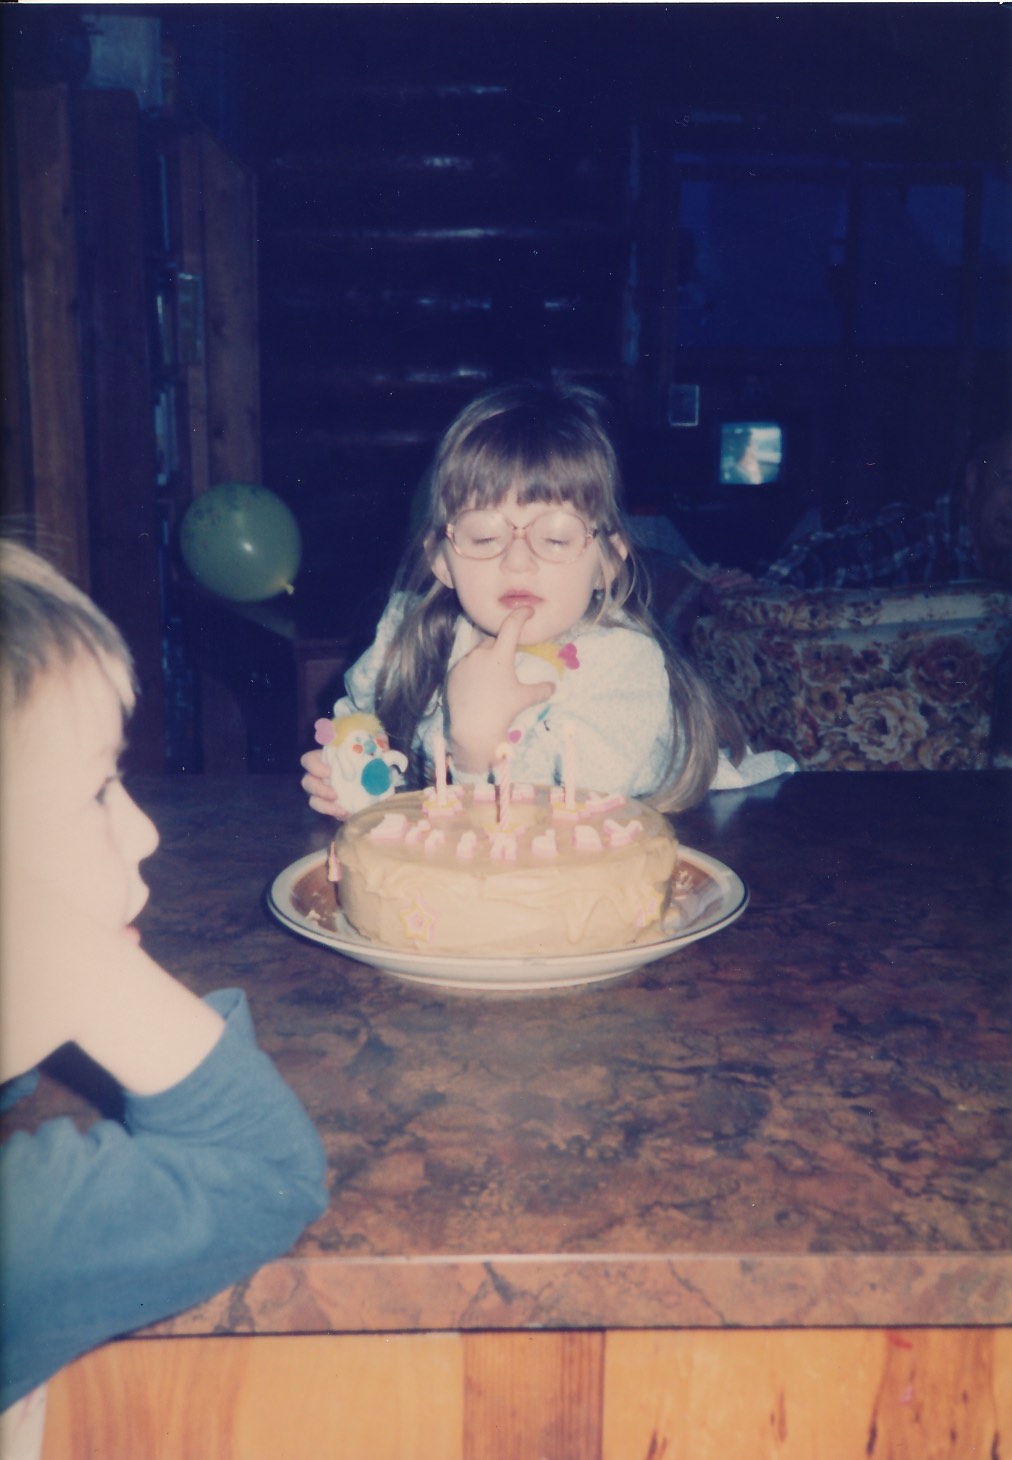  I still feel this way about cake... 